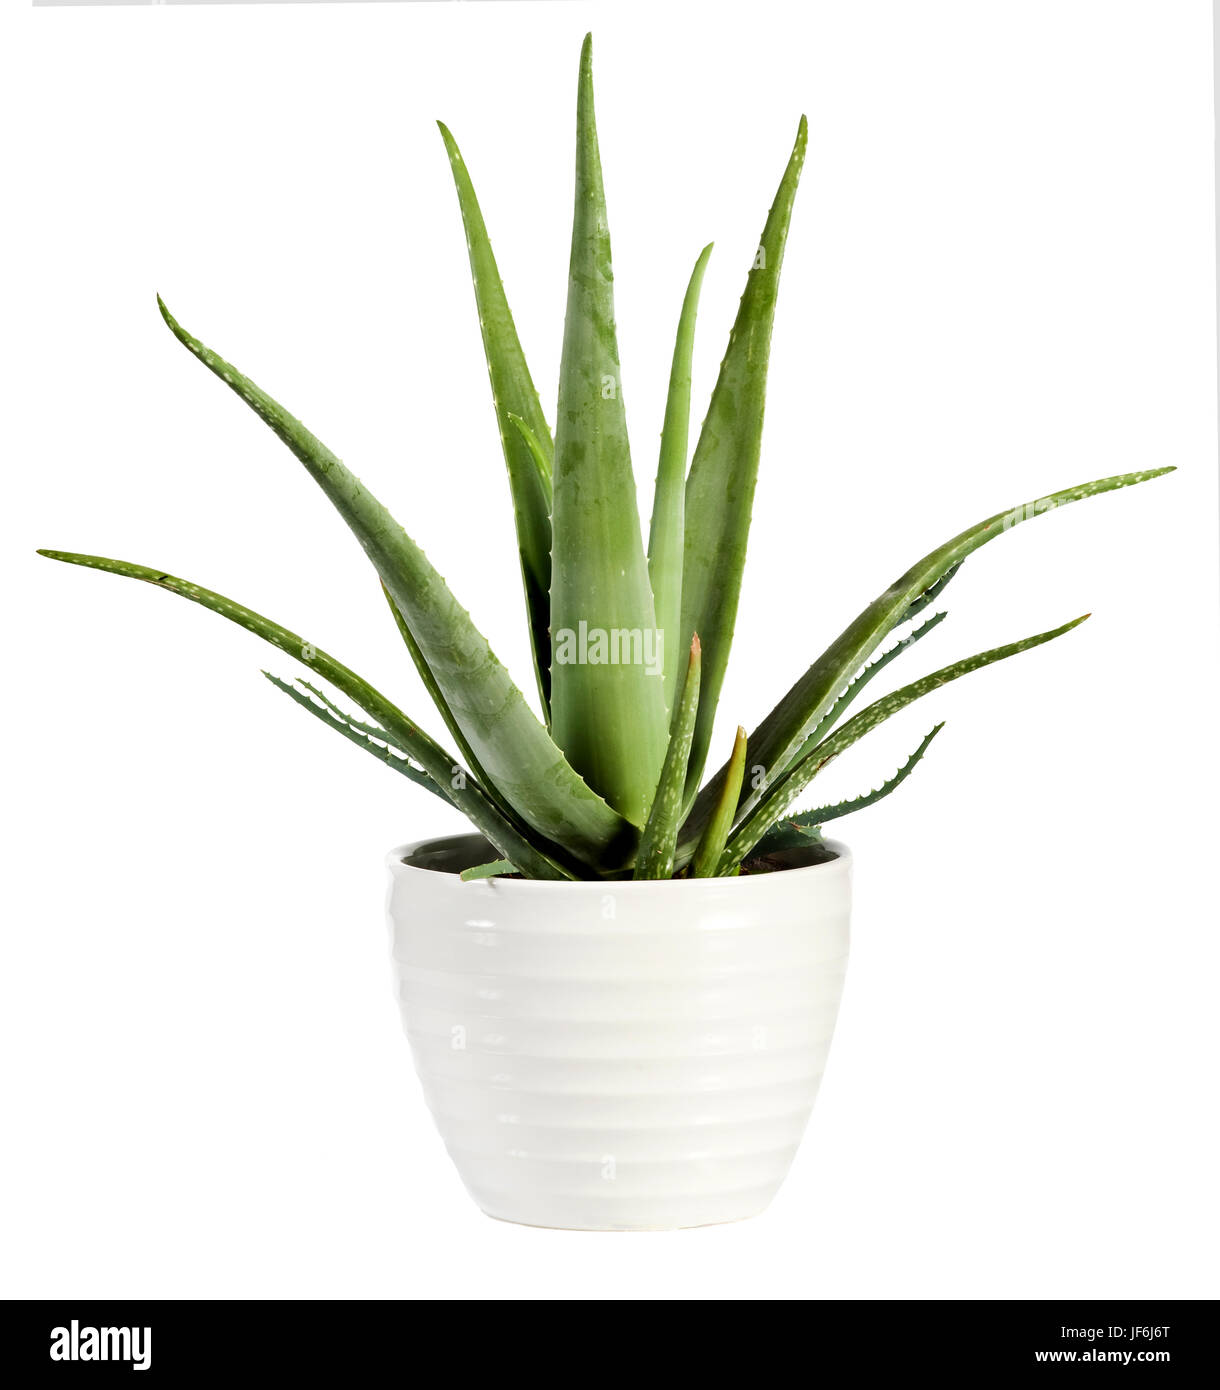 Isolated fresh Aloe vera plant in a flowerpot with its succulent leaves from which the soothing sap used for healing and medicinal purposes is derived Stock Photo